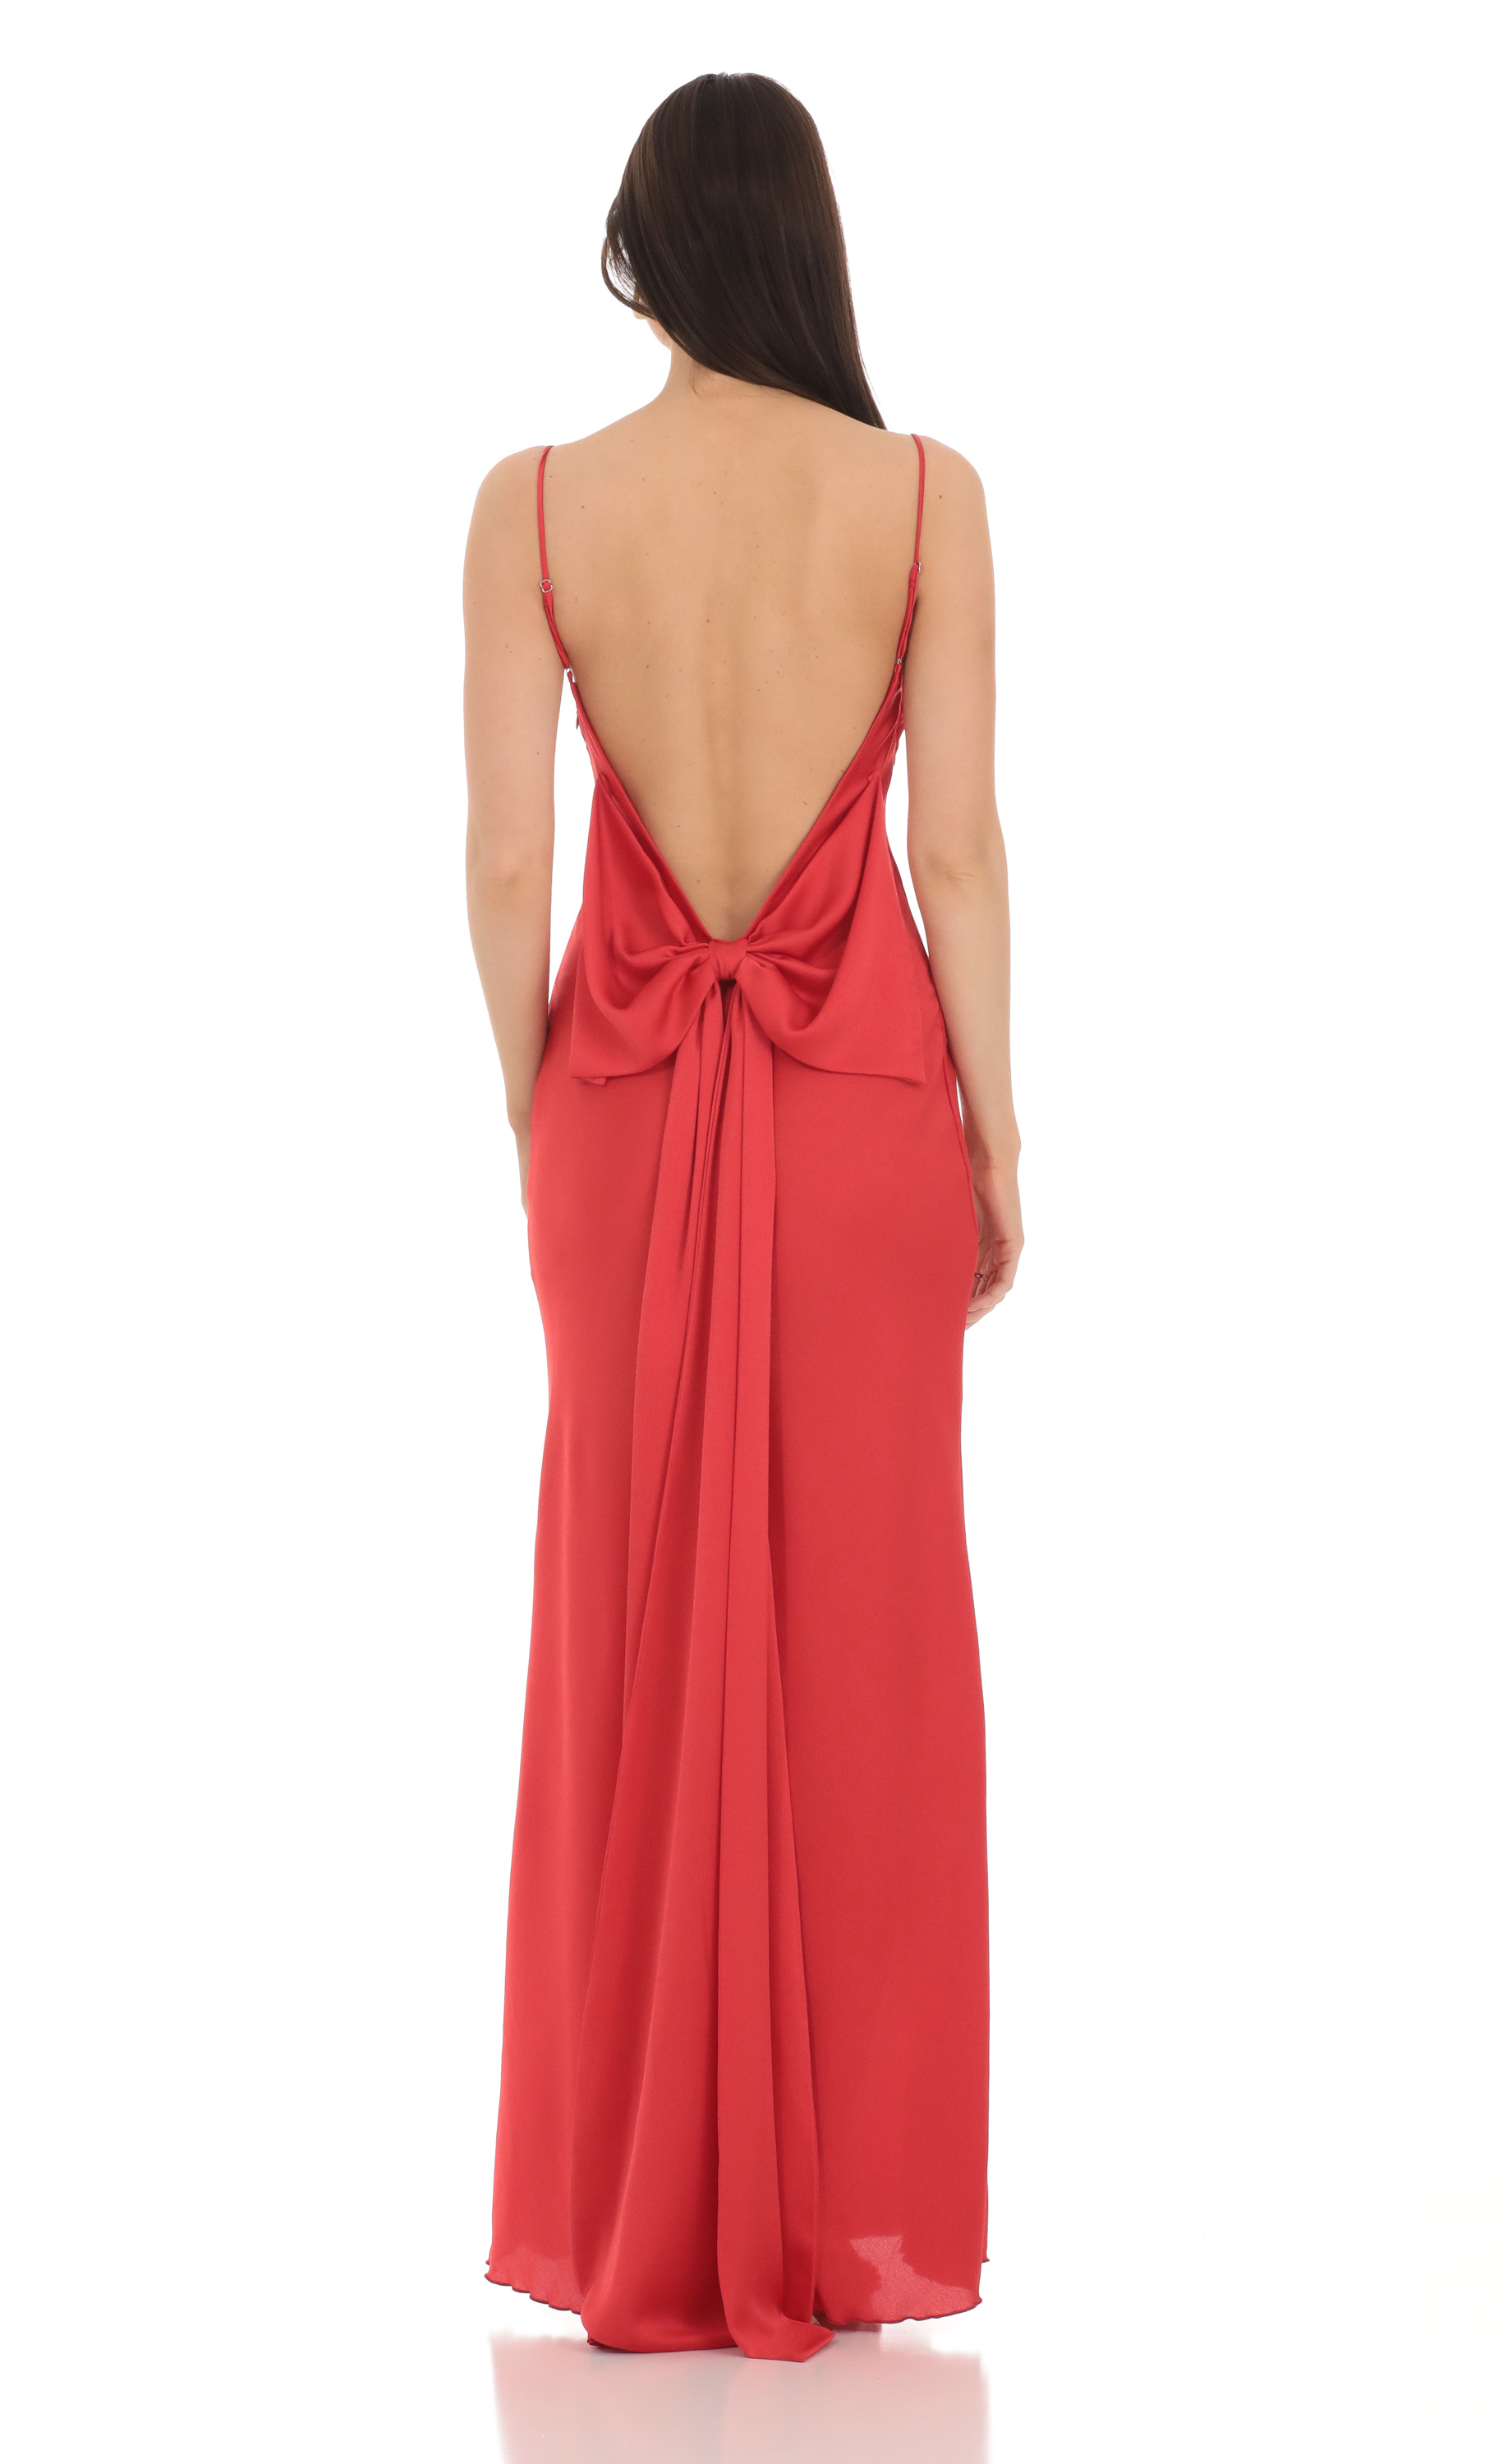 Back Bow Satin Dress in Red